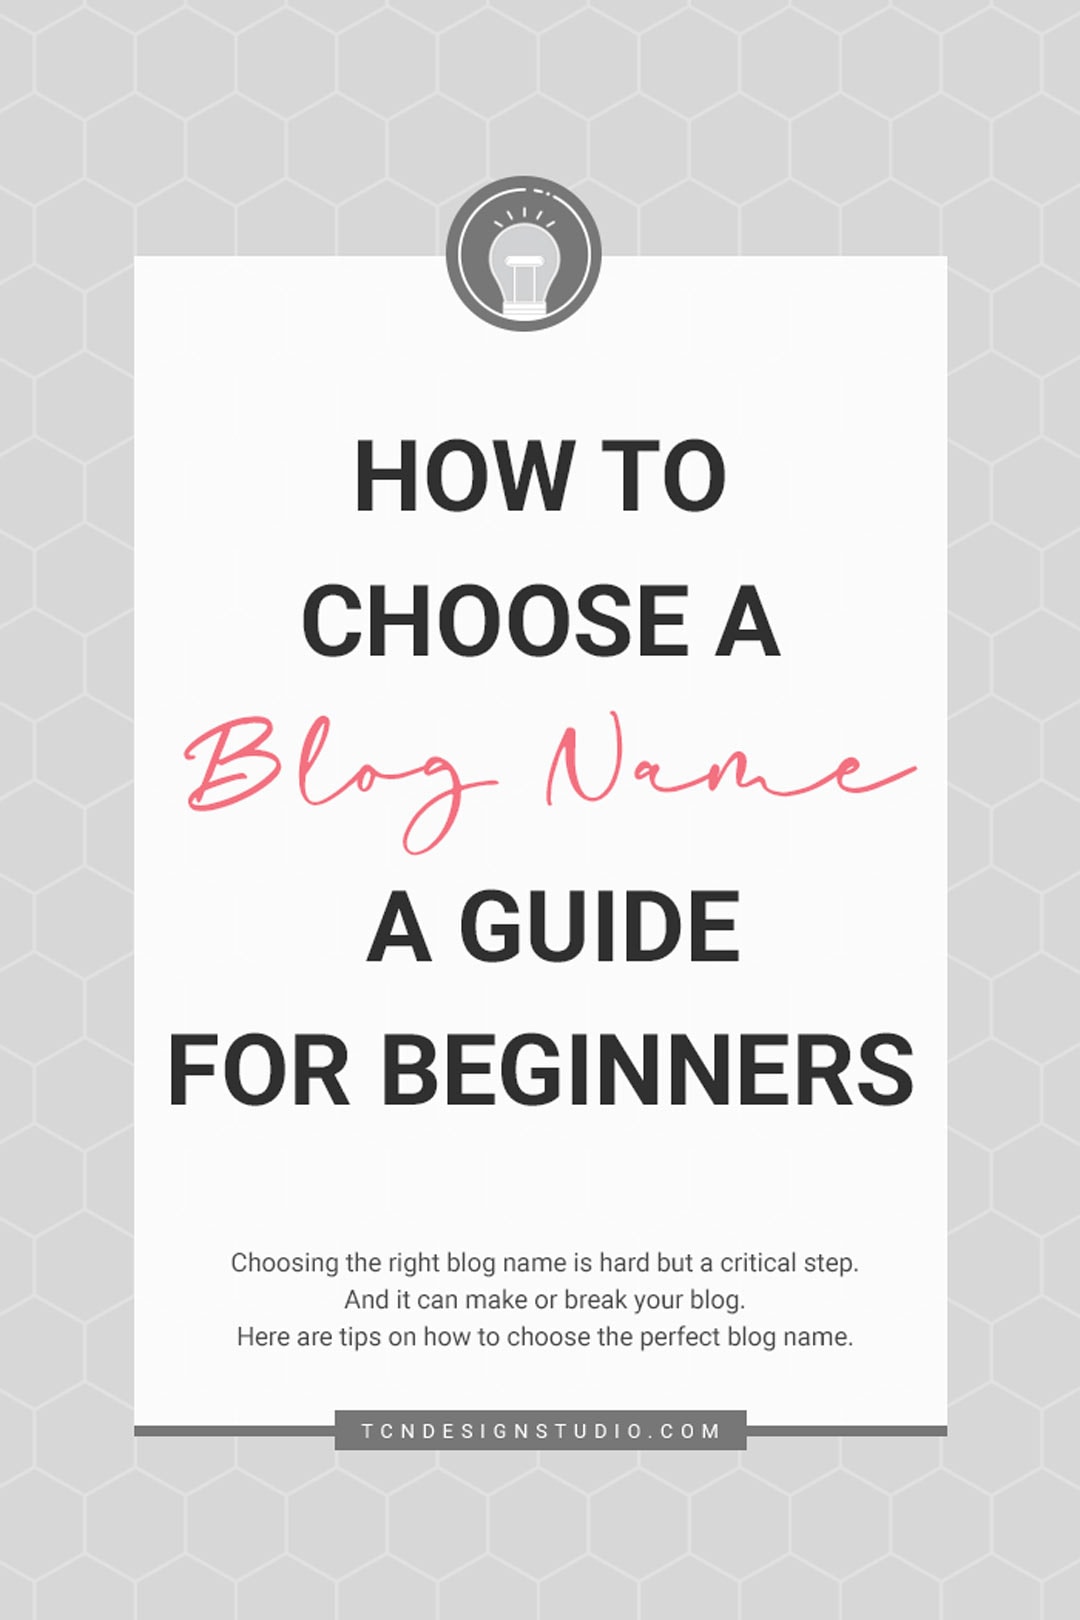 How to Choose a Blog Name: A Guide for Beginners